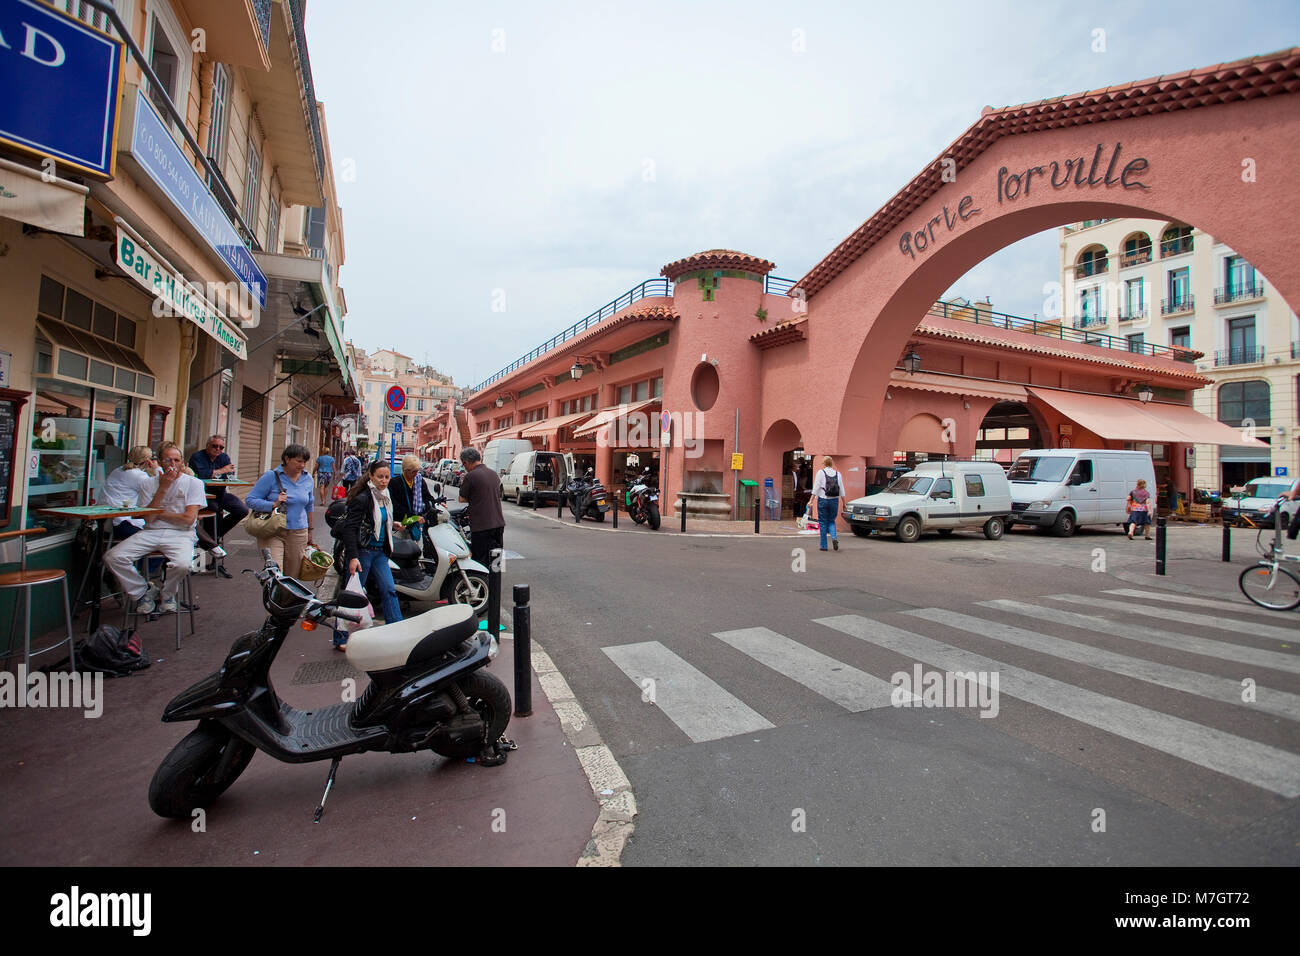 Port Forville, fruit and vegetable market at old town Le Suquet, Cannes, french riviera, South France, France, Europe Stock Photo